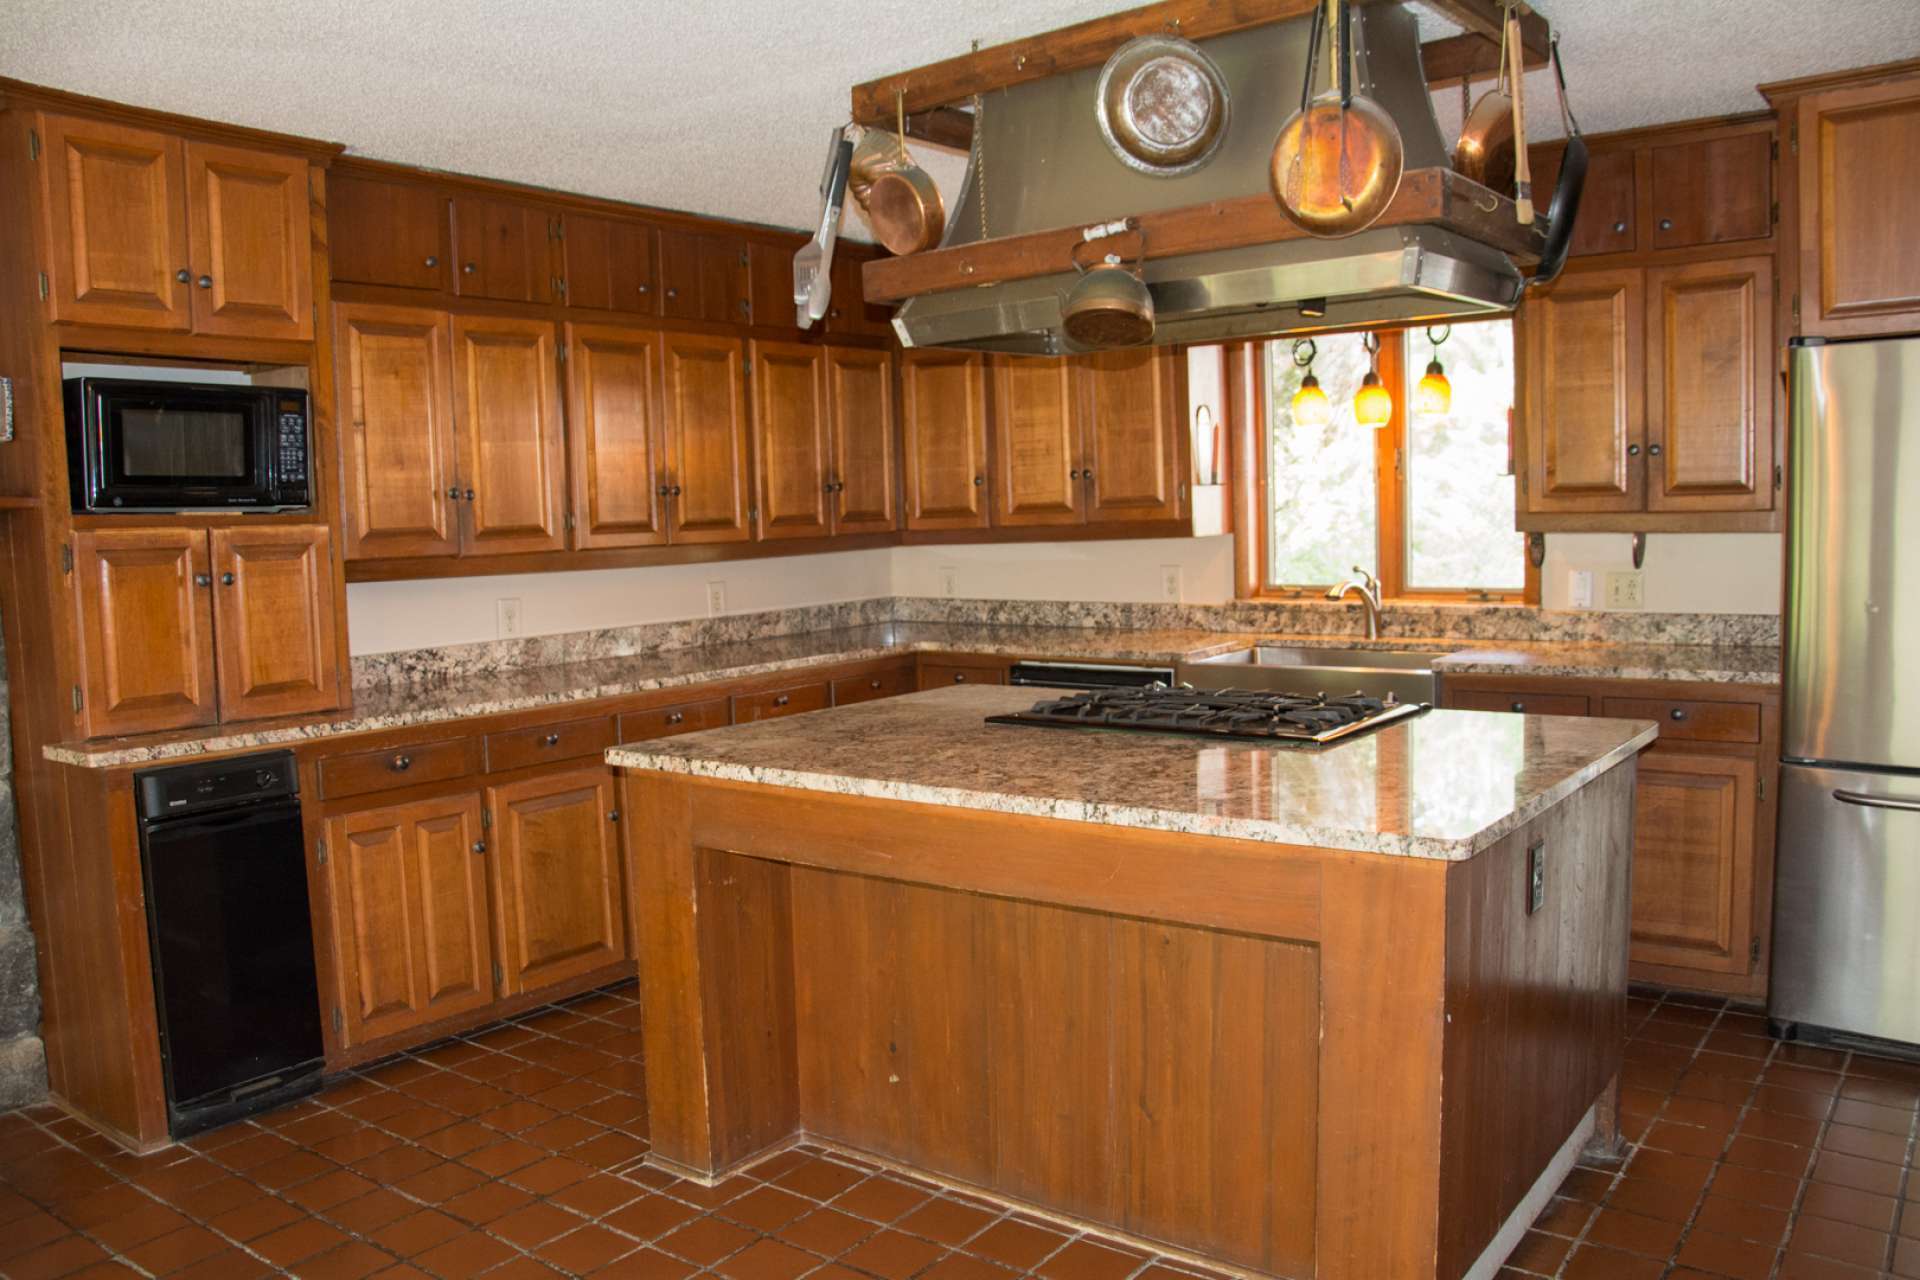 A spacious kitchen with granite counter tops, apron sink, large center island, gas range, and tiled floor.